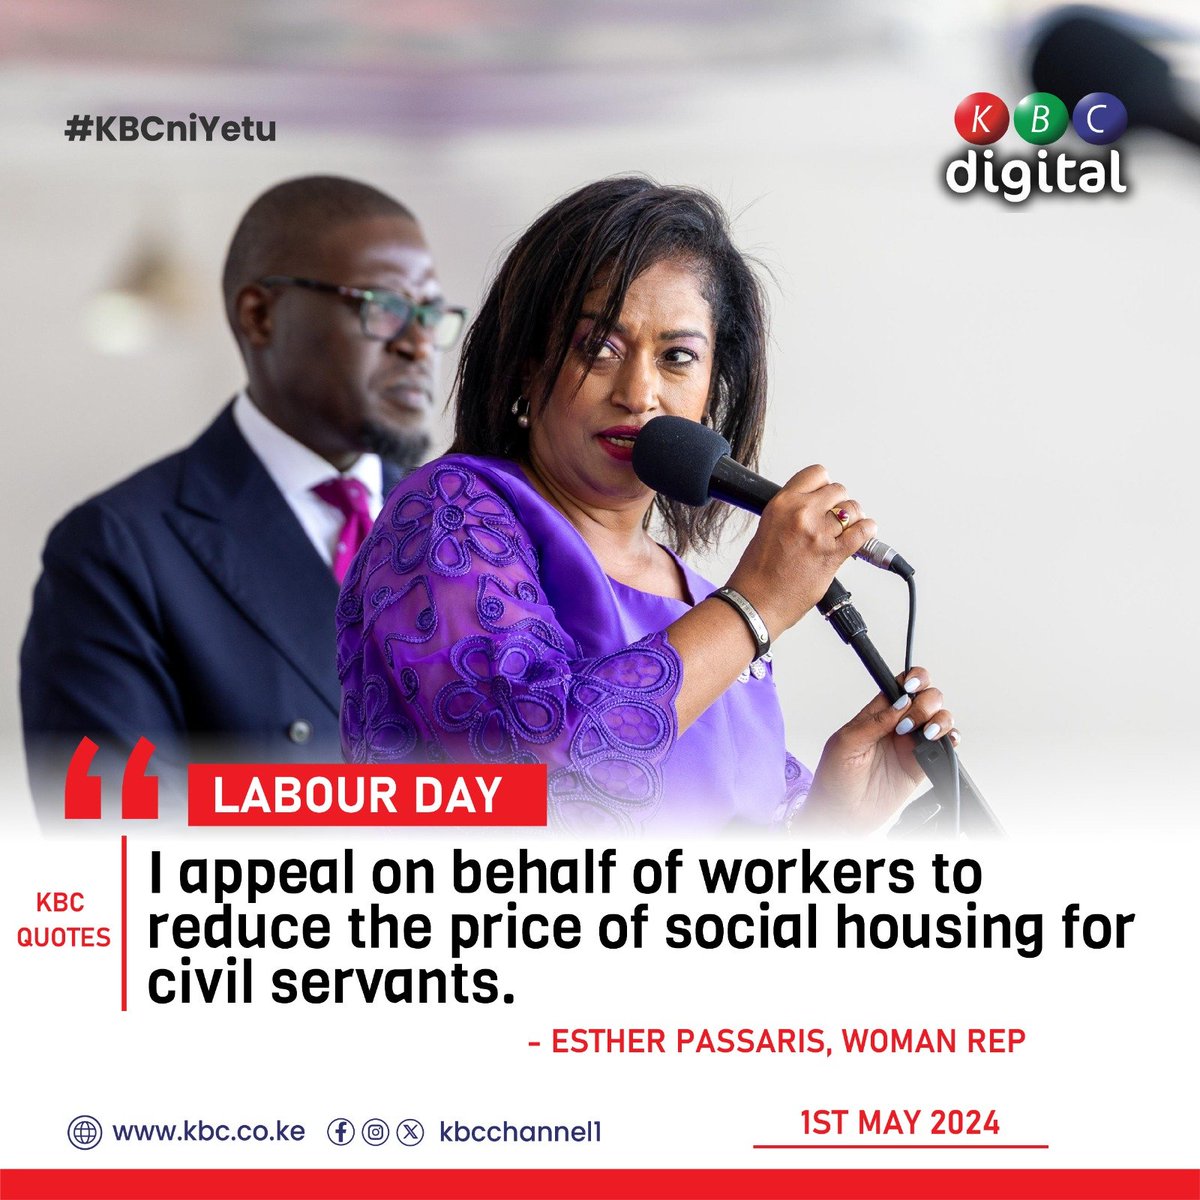 'I appeal on behalf of workers to reduce the price of social housing for civil servants.'
- Esther Passaris
#KBCniYetu^EM